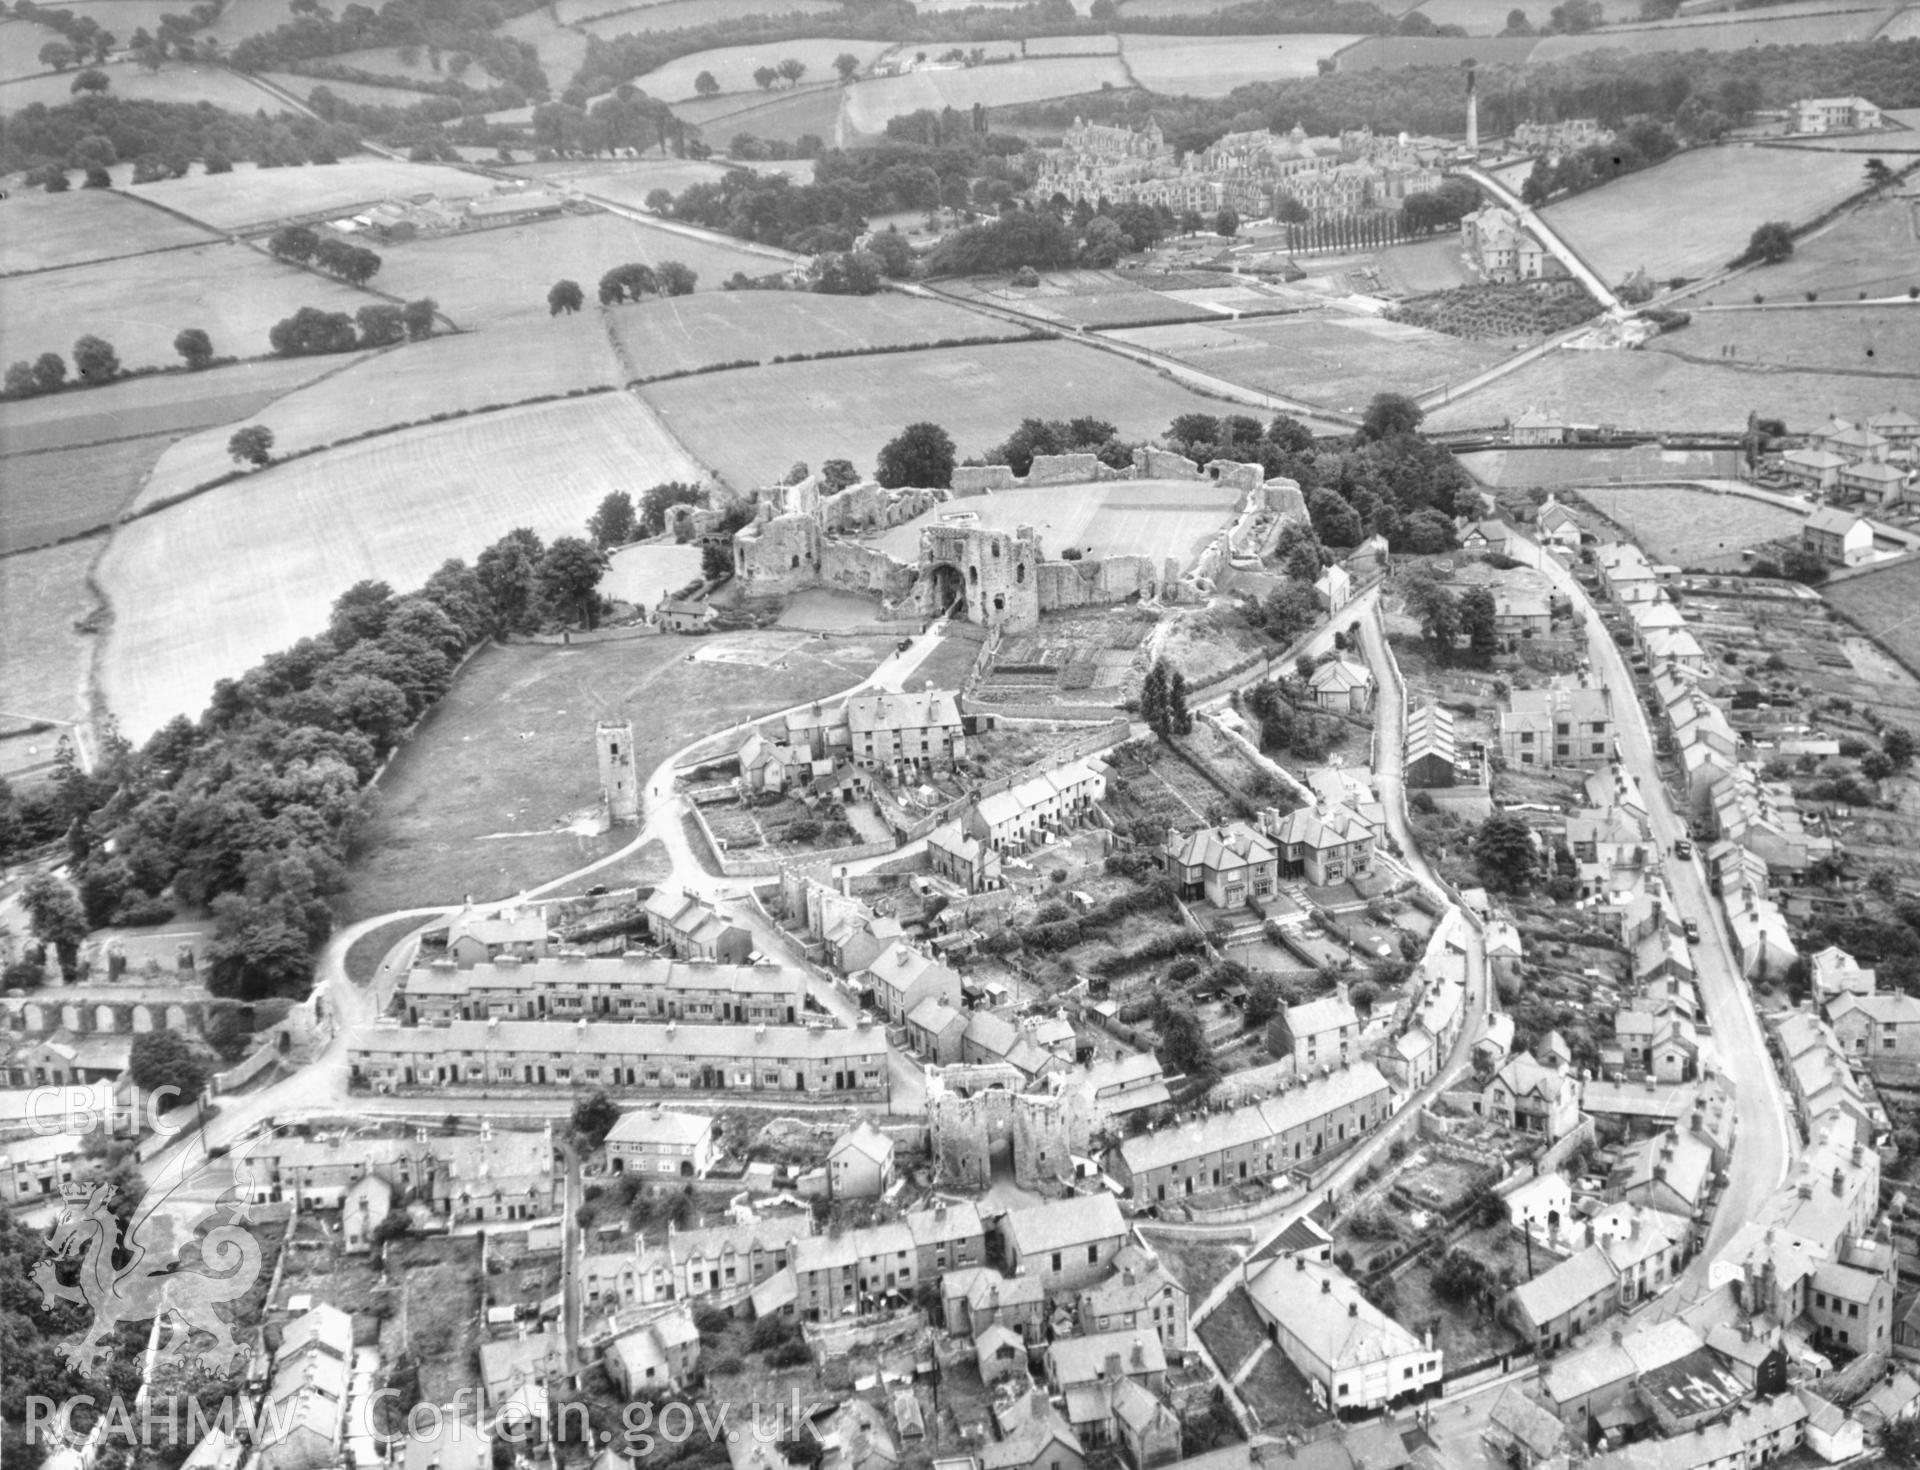 Photographs and postcards of Denbigh Castle (39 colour and black and white images), includes 3 aerial photographs produced by Aerofilms Ltd, Boreham Wood.